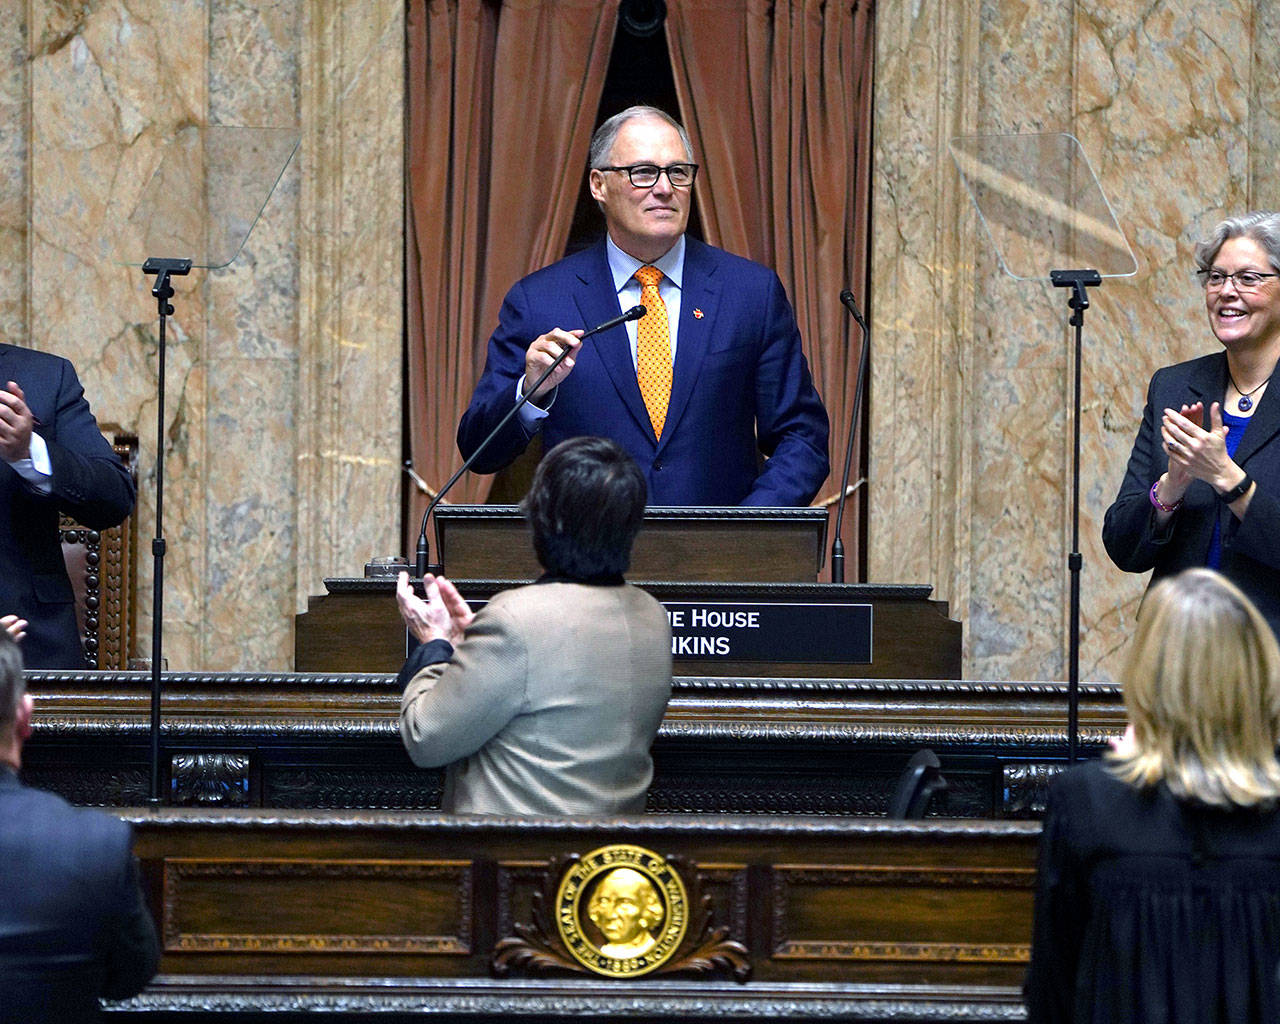 Jay Inslee (Washington State Office of the Governor)